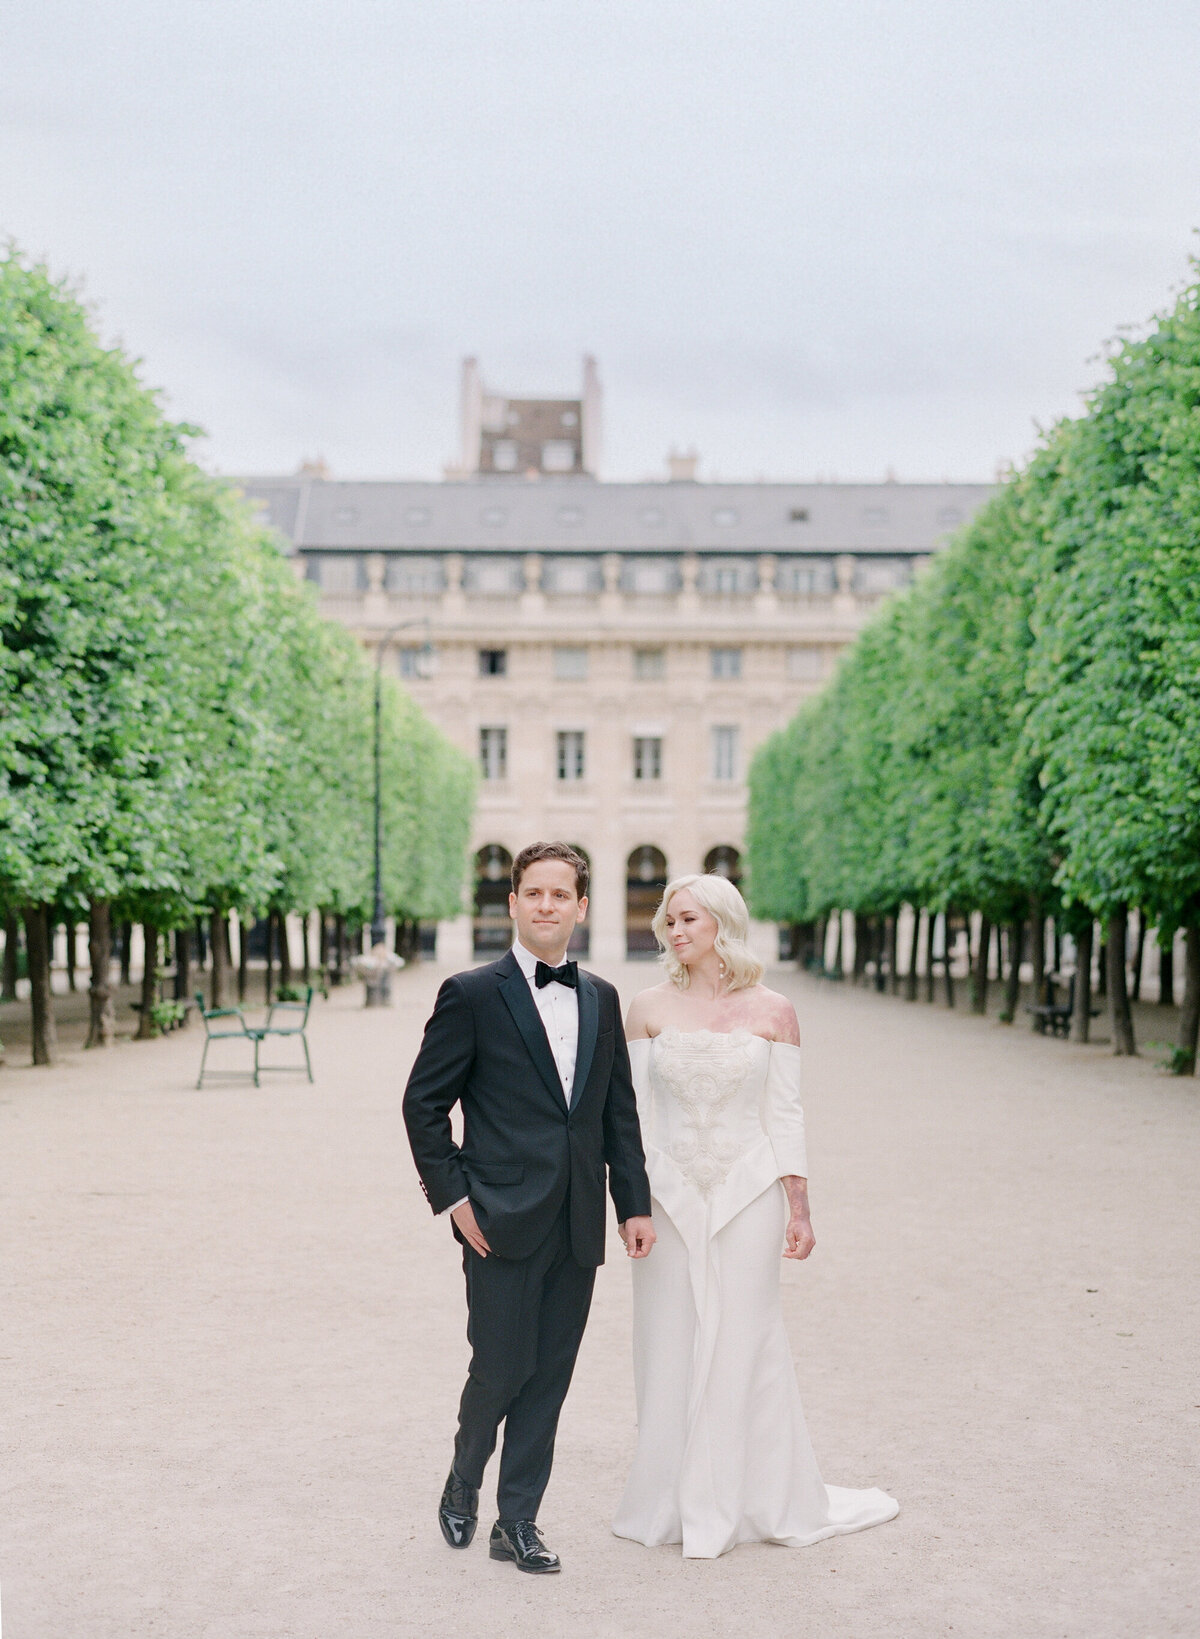 Jennifer Fox Weddings English speaking wedding planning & design agency in France crafting refined and bespoke weddings and celebrations Provence, Paris and destination Laurel-Chris-Chateau-de-Champlatreaux-Molly-Carr-Photography-12